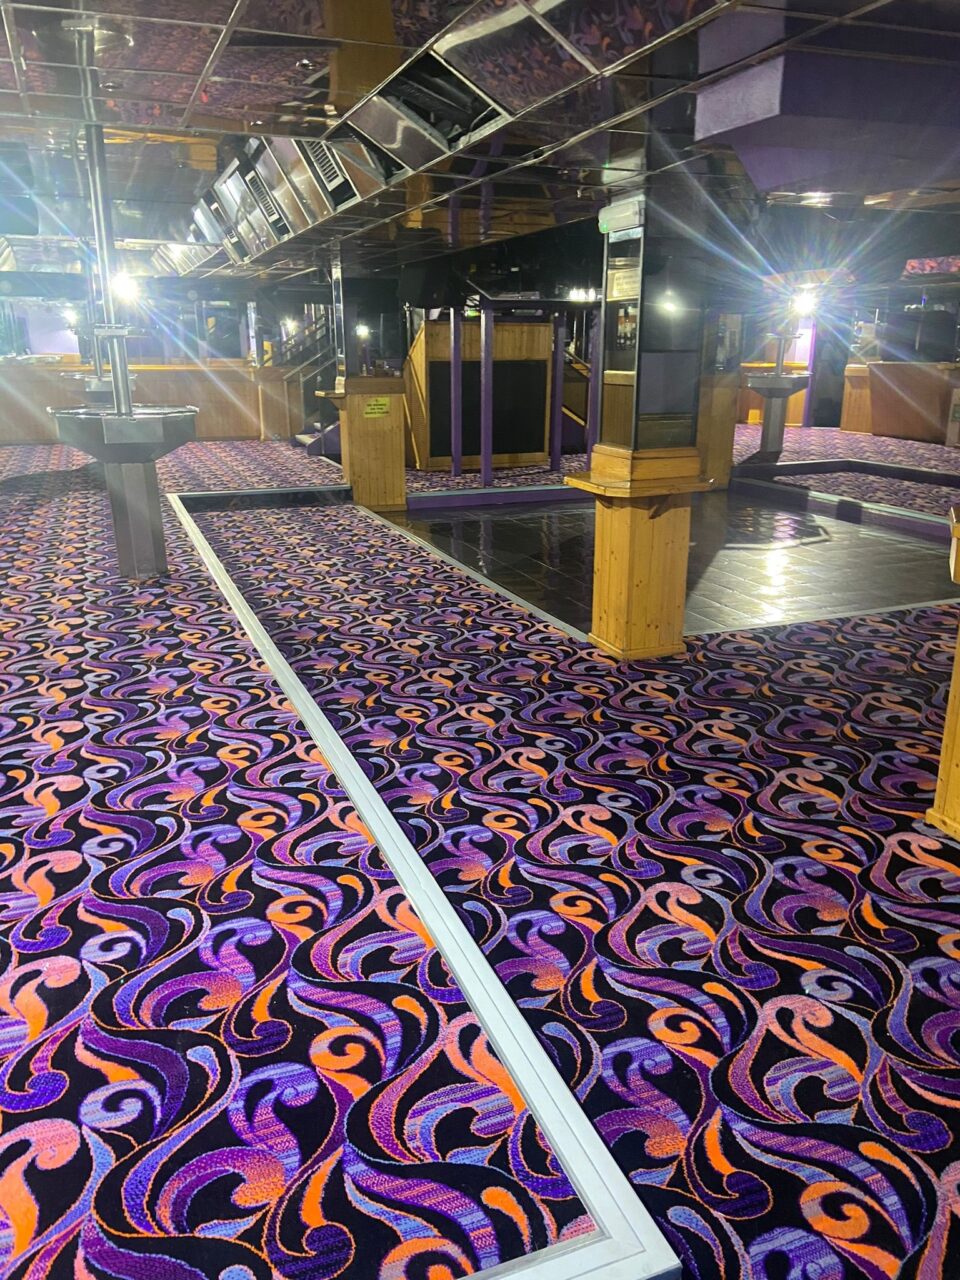 Wide shot of Acapulco Nightclub Halifax dance floor with bespoke purple and black patterned carpets designed by Wilton Carpets